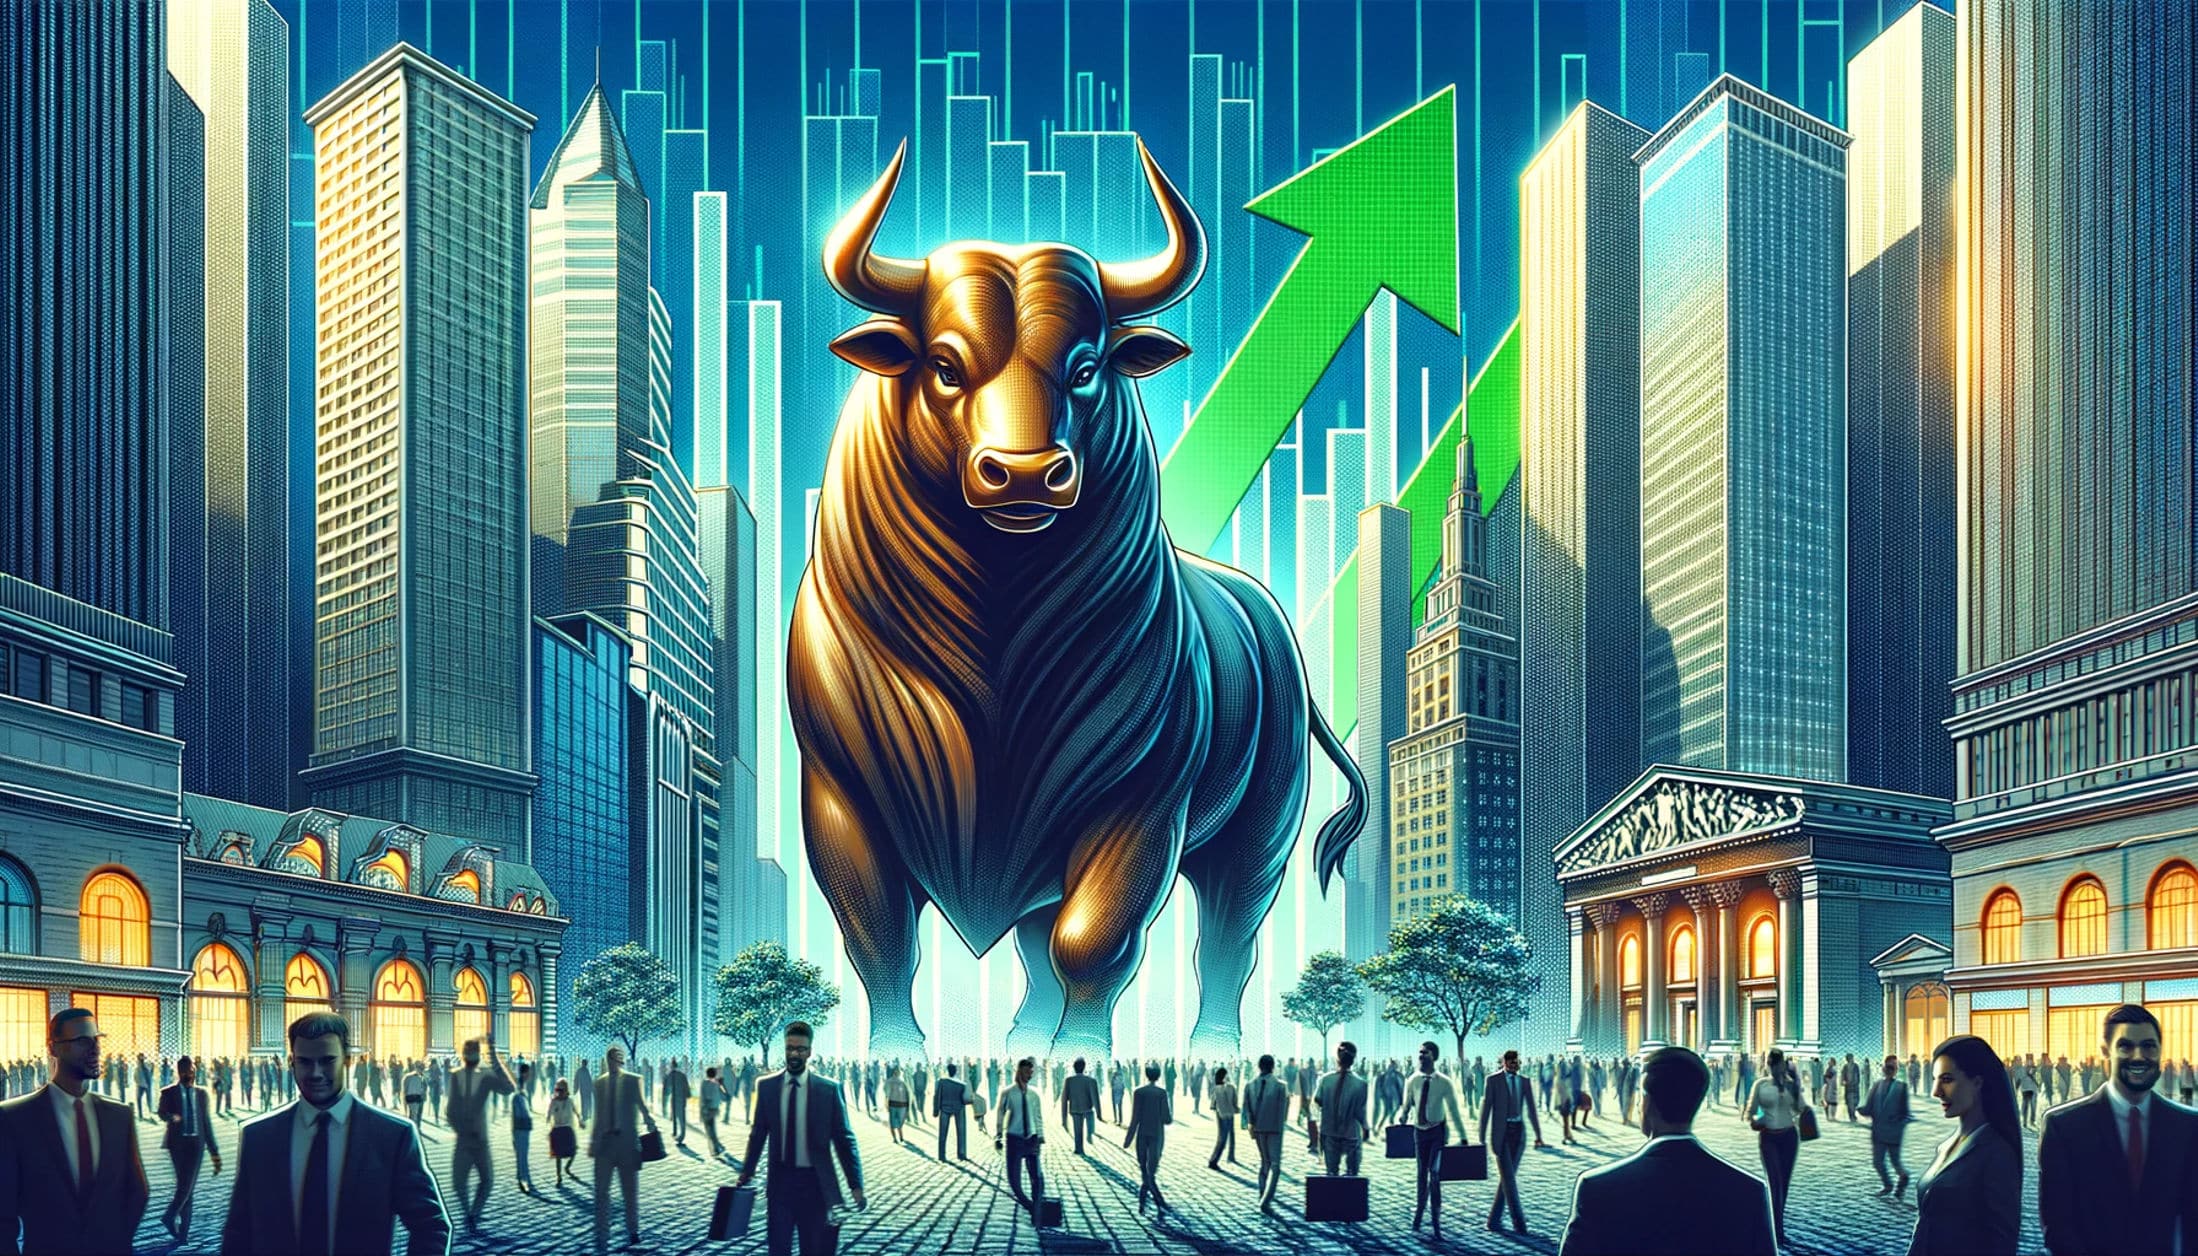 An illustration of a bull market, showing a majestic bull in a bustling financial district with upward-pointing green arrows symbolizing rising stock prices.